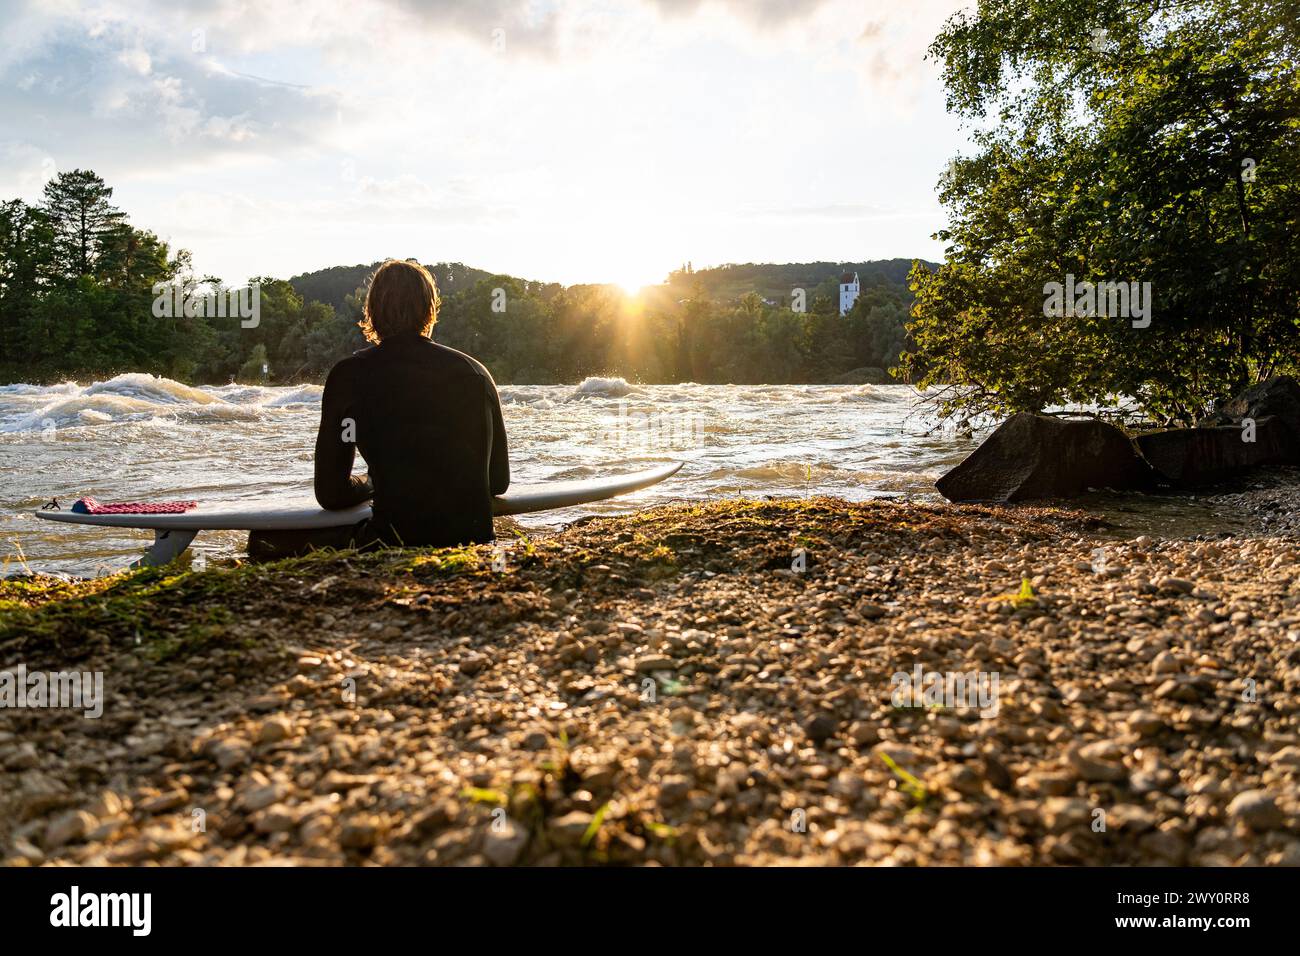 A young surfer sits by the Aare River, gazing at the sunset, enjoying the calm ambiance. Stock Photo